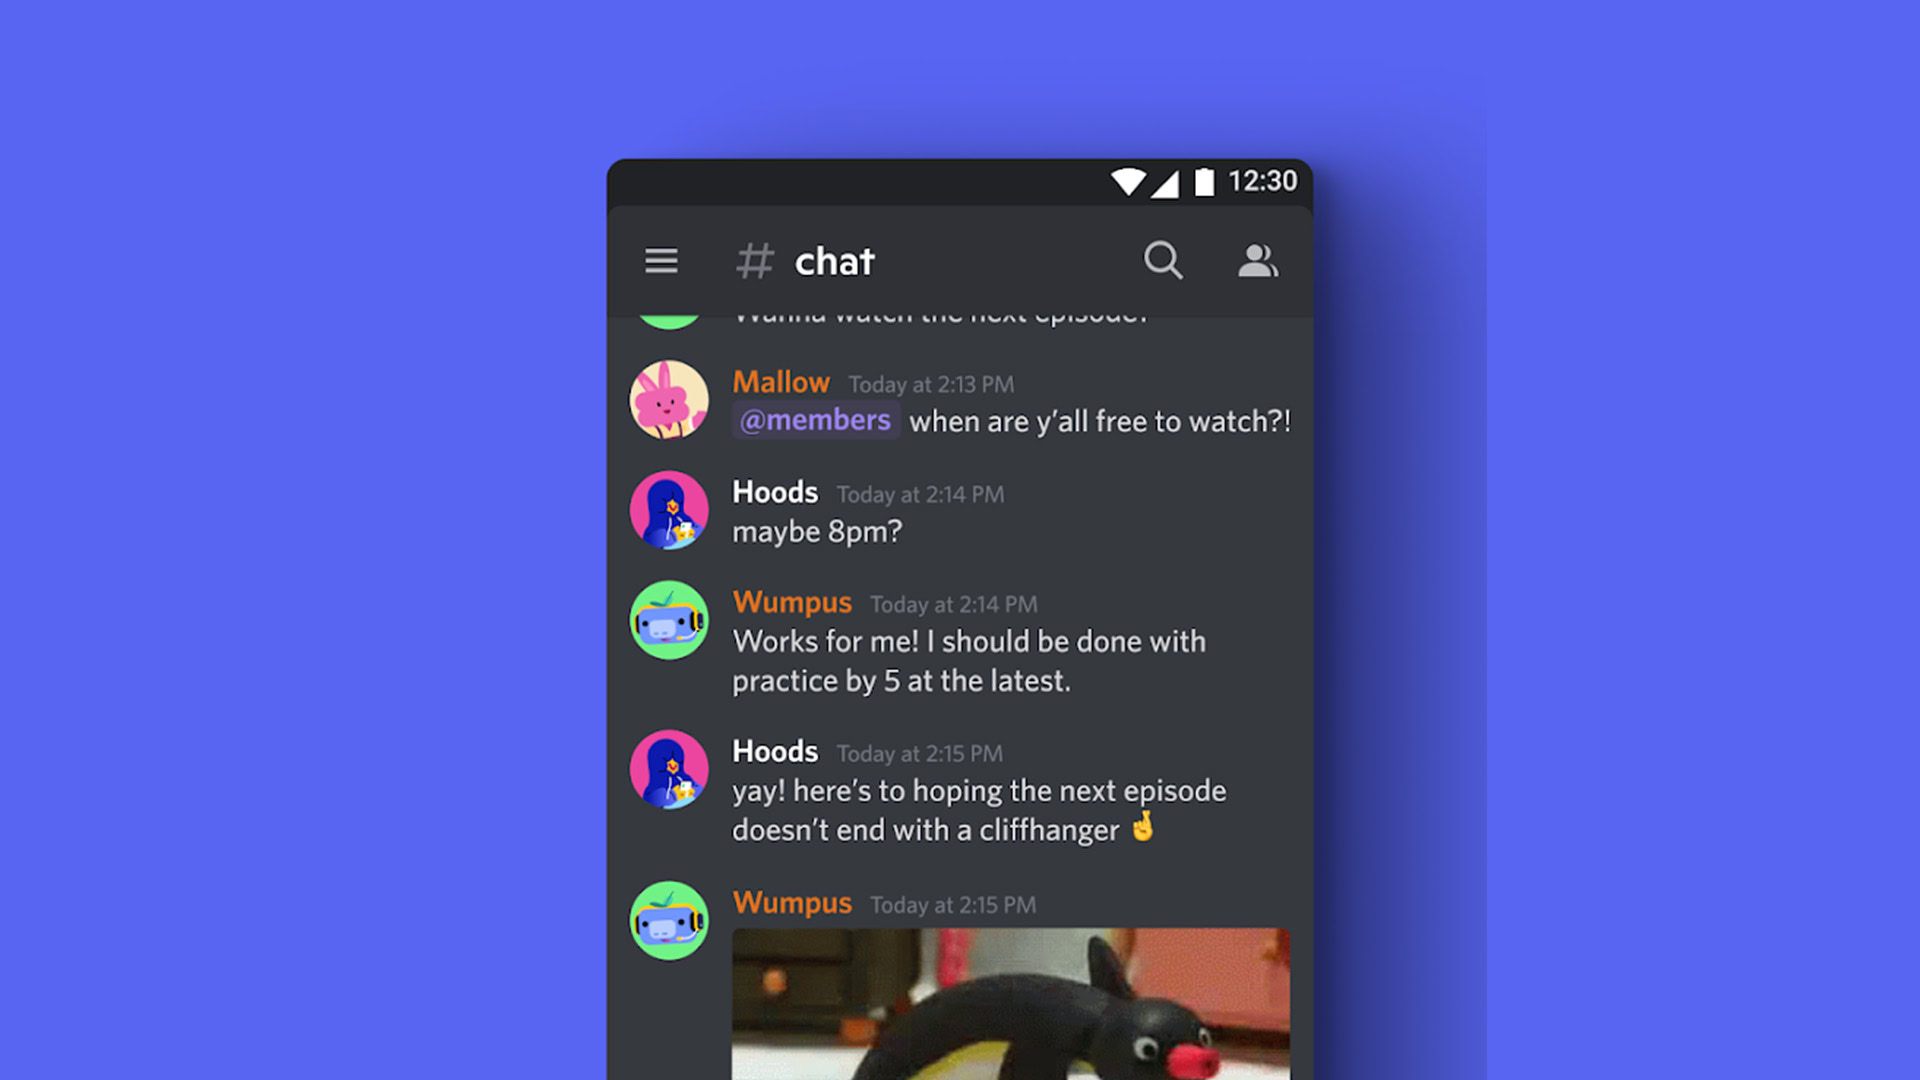 The best chat room apps for Android pic